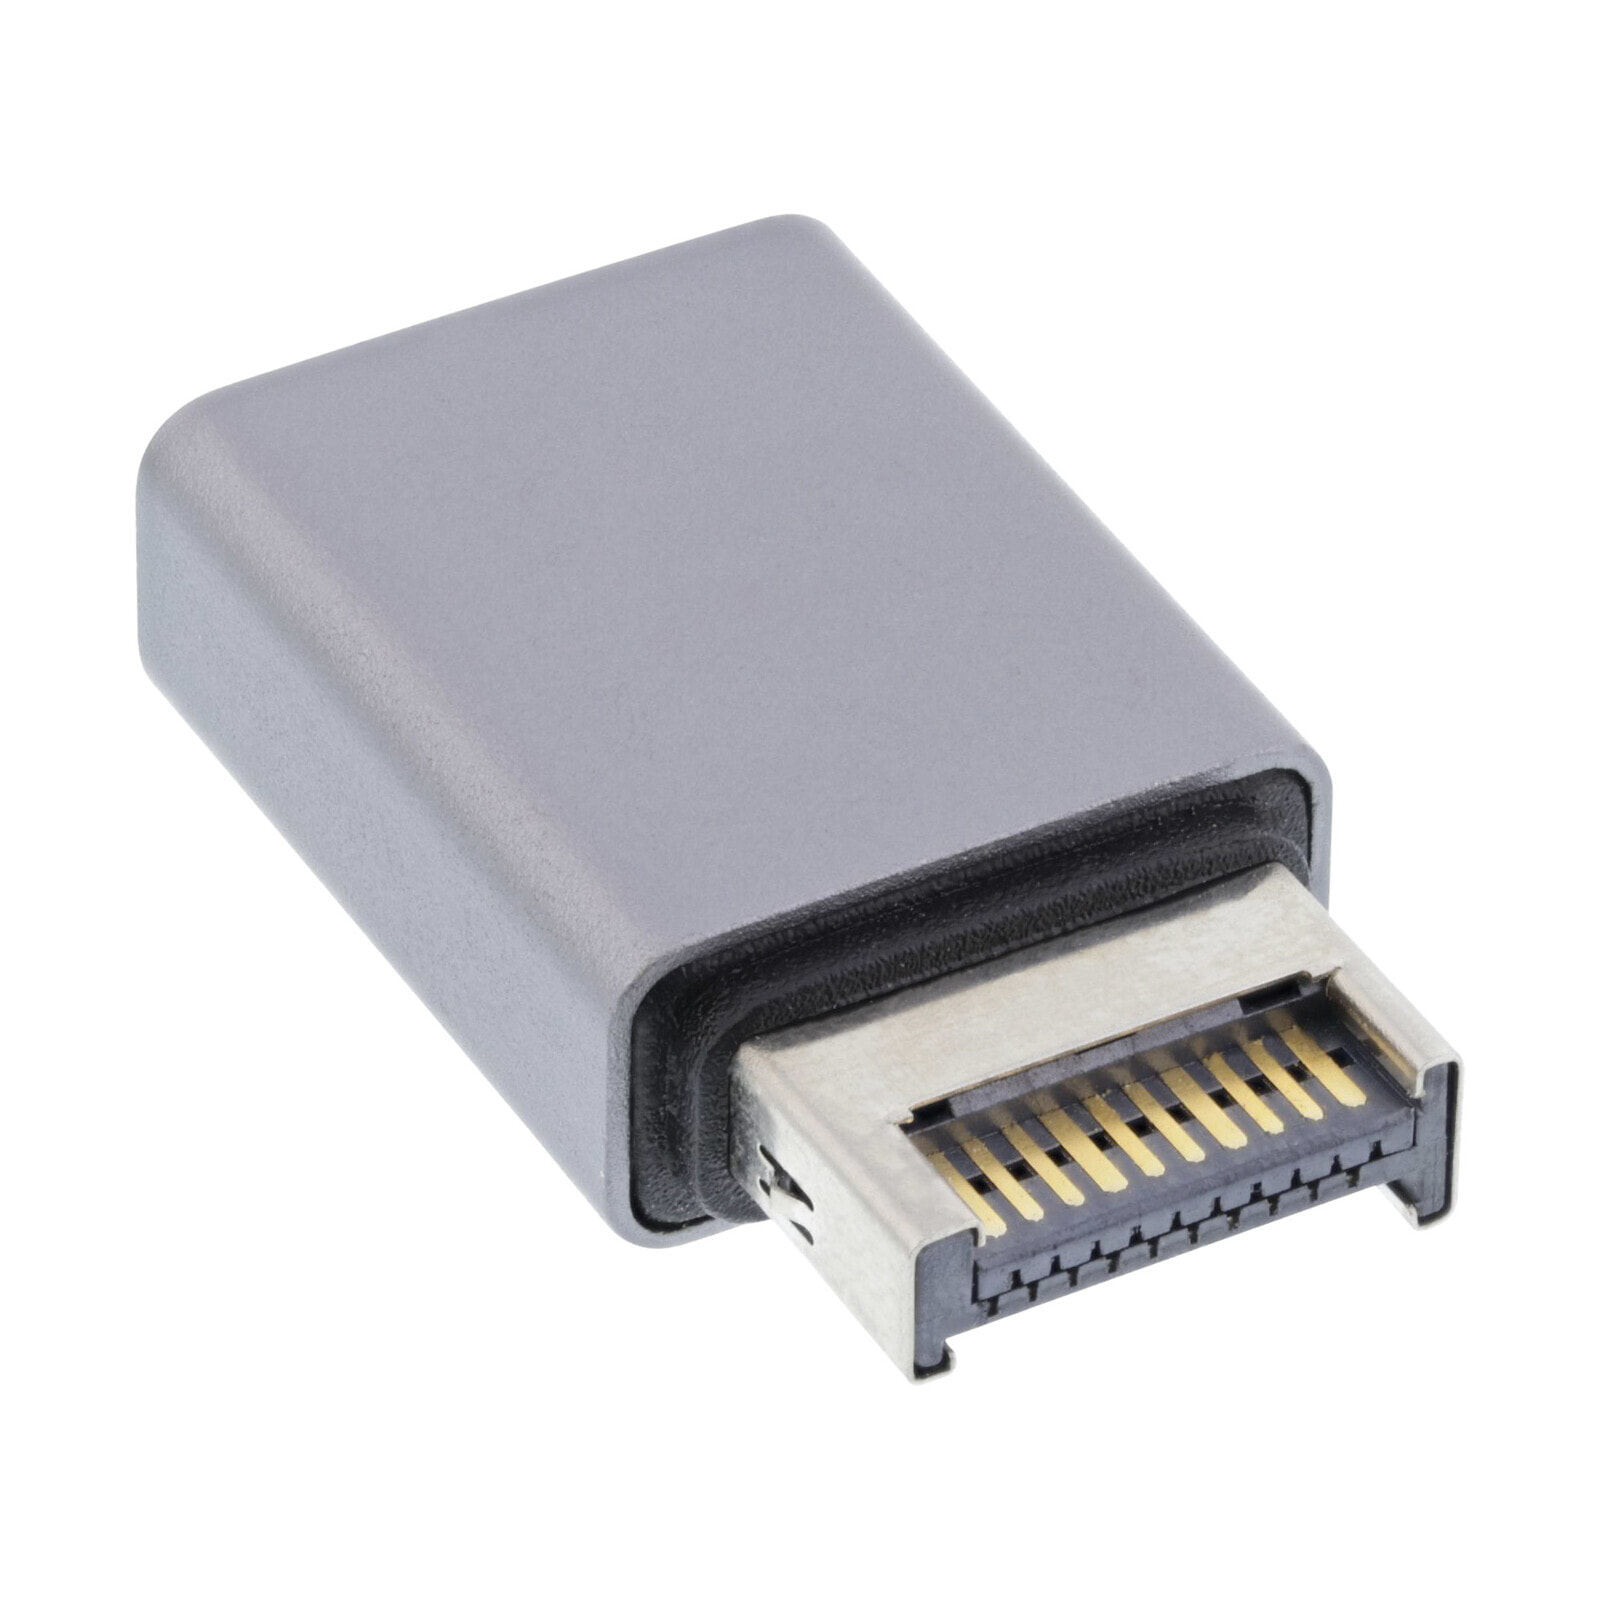 InLine USB 3.2 adapter - internal USB-E front panel male to USB-C female